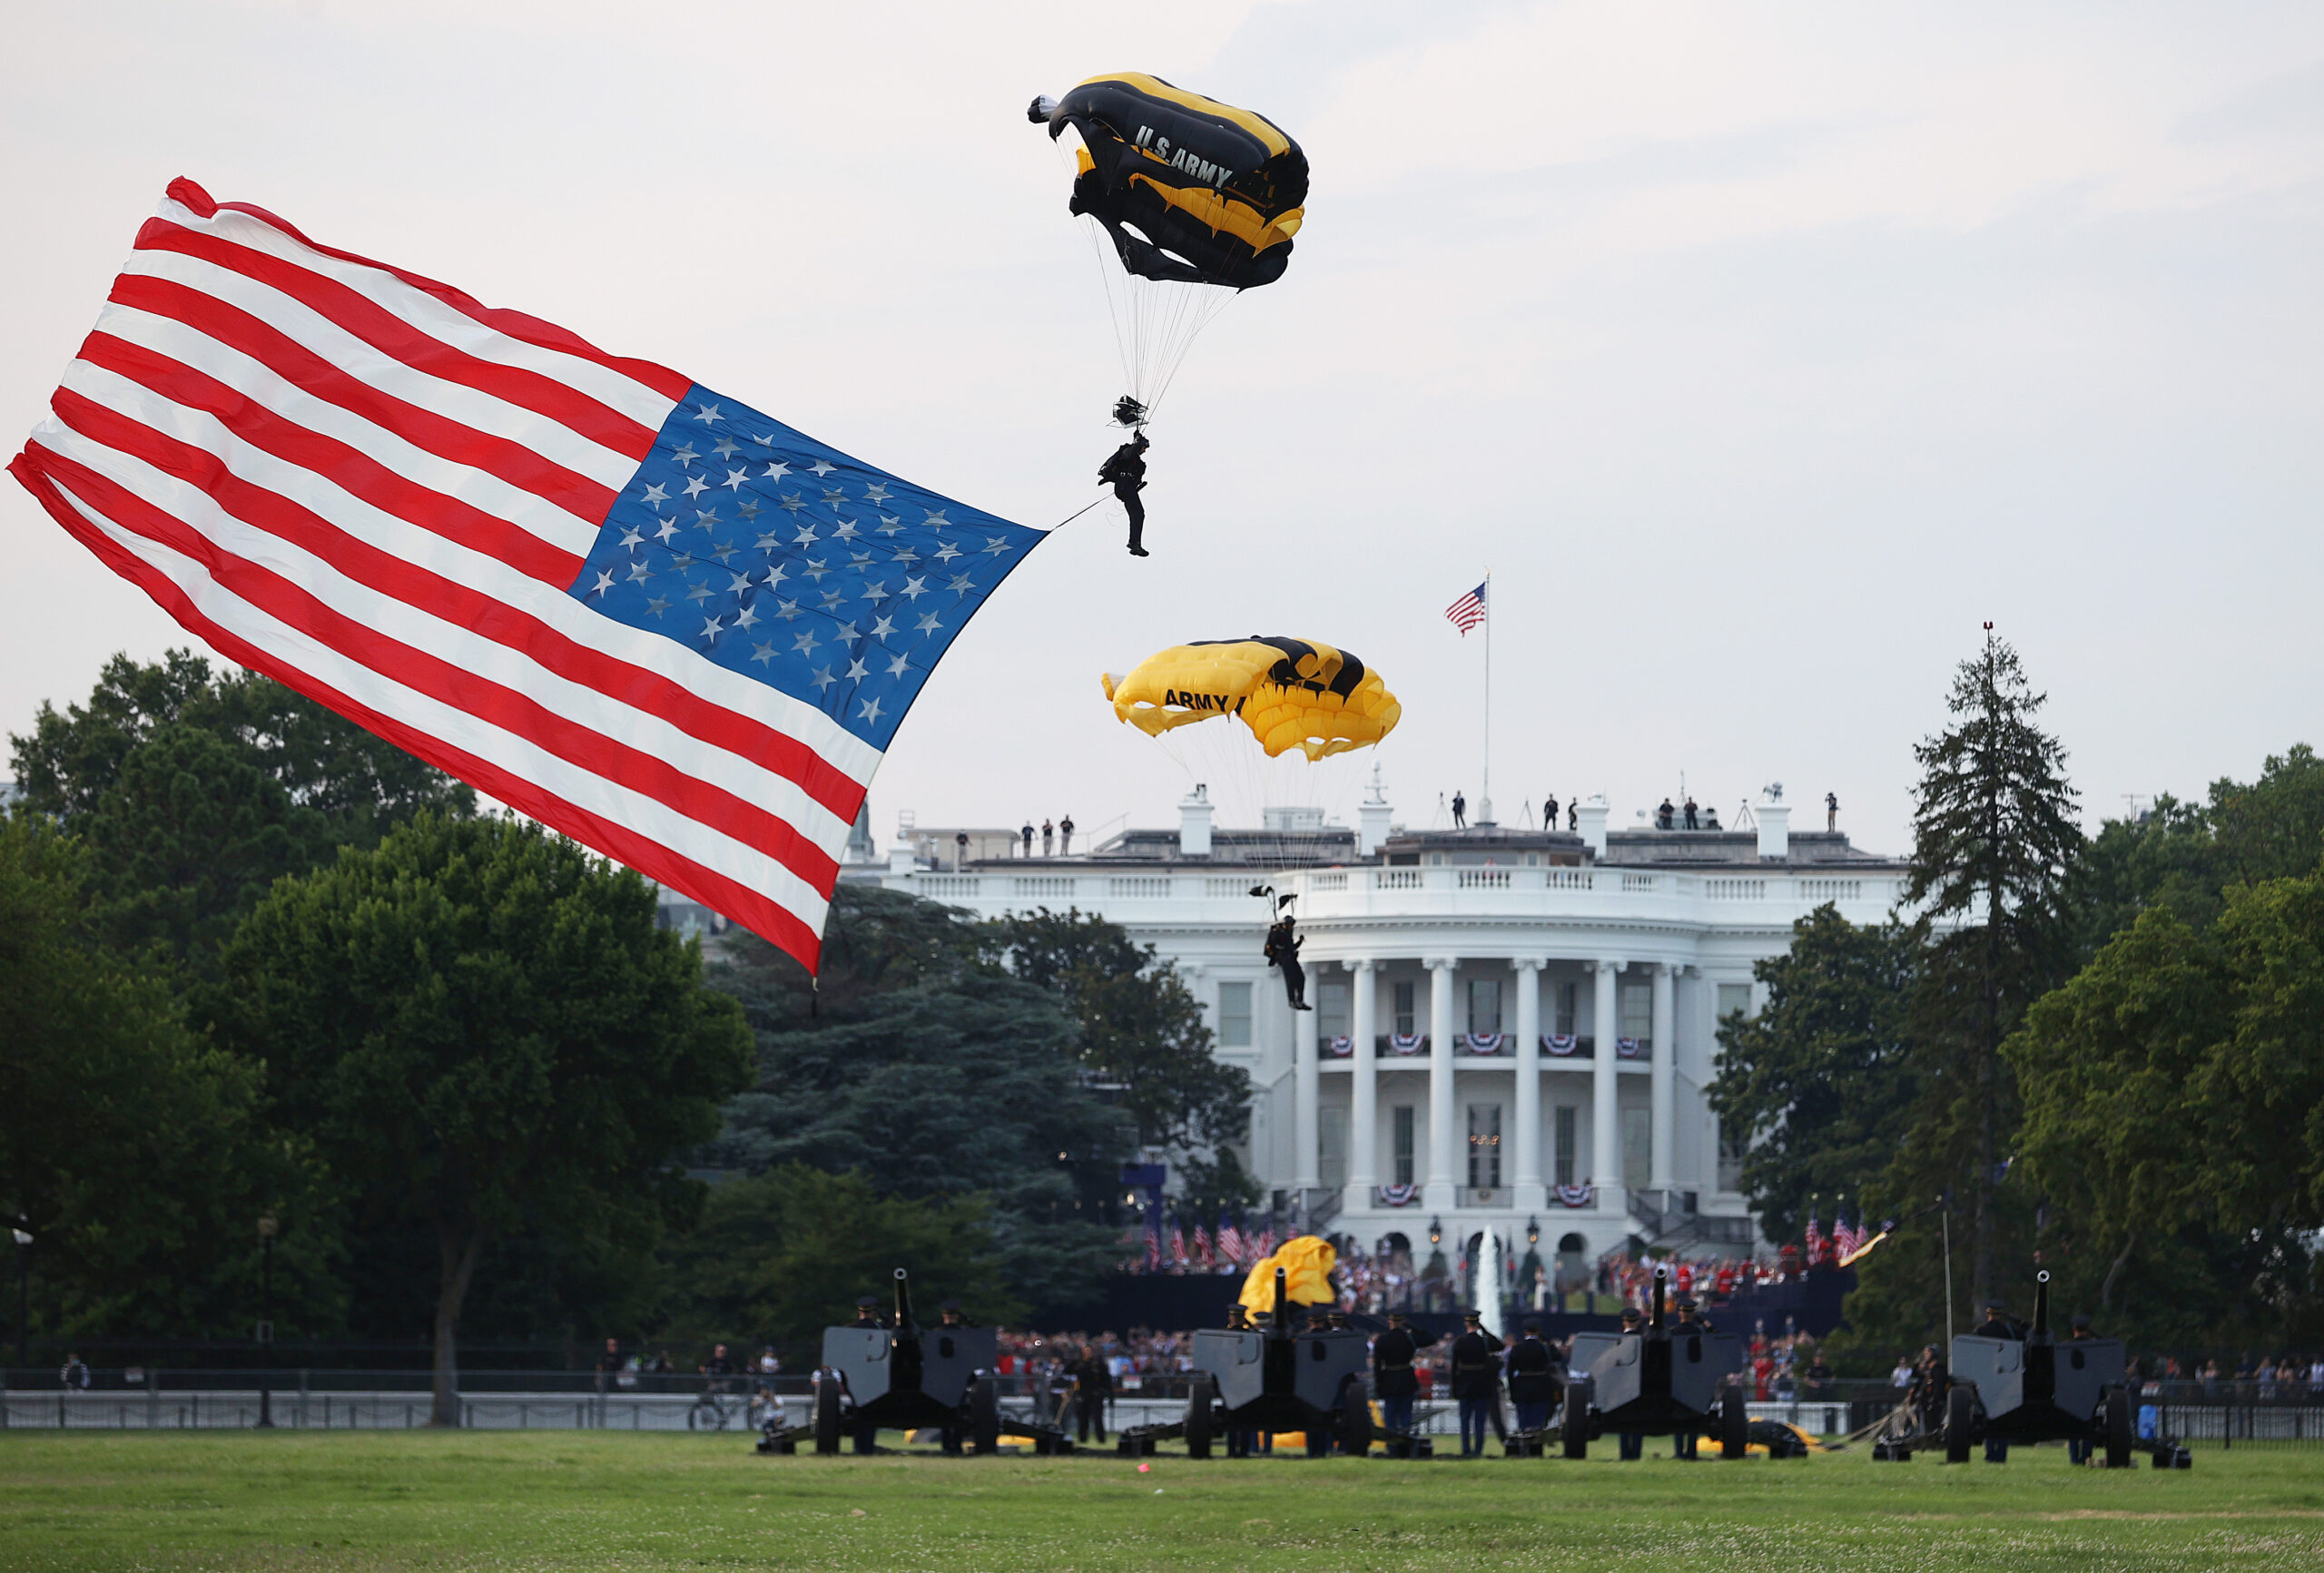 8News skydives with U.S. Army Golden Knights in Hanover County